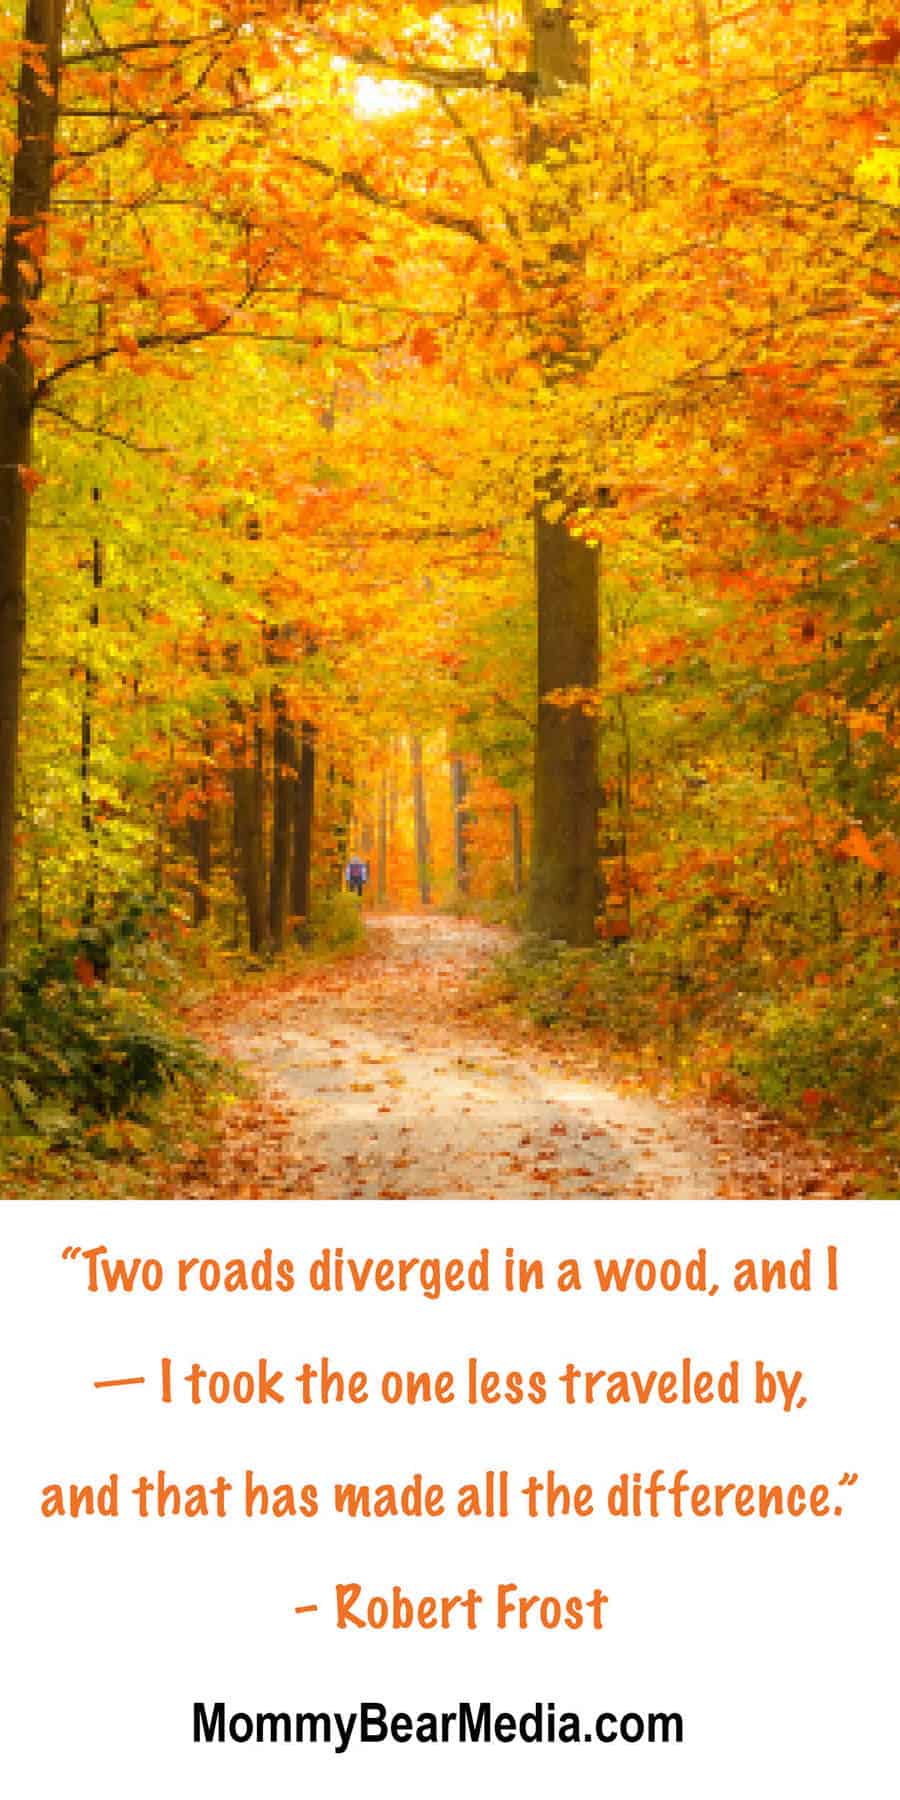 “Two roads diverged in a wood, and I — I took the one less traveled by, and that has made all the difference.” – Robert Frost